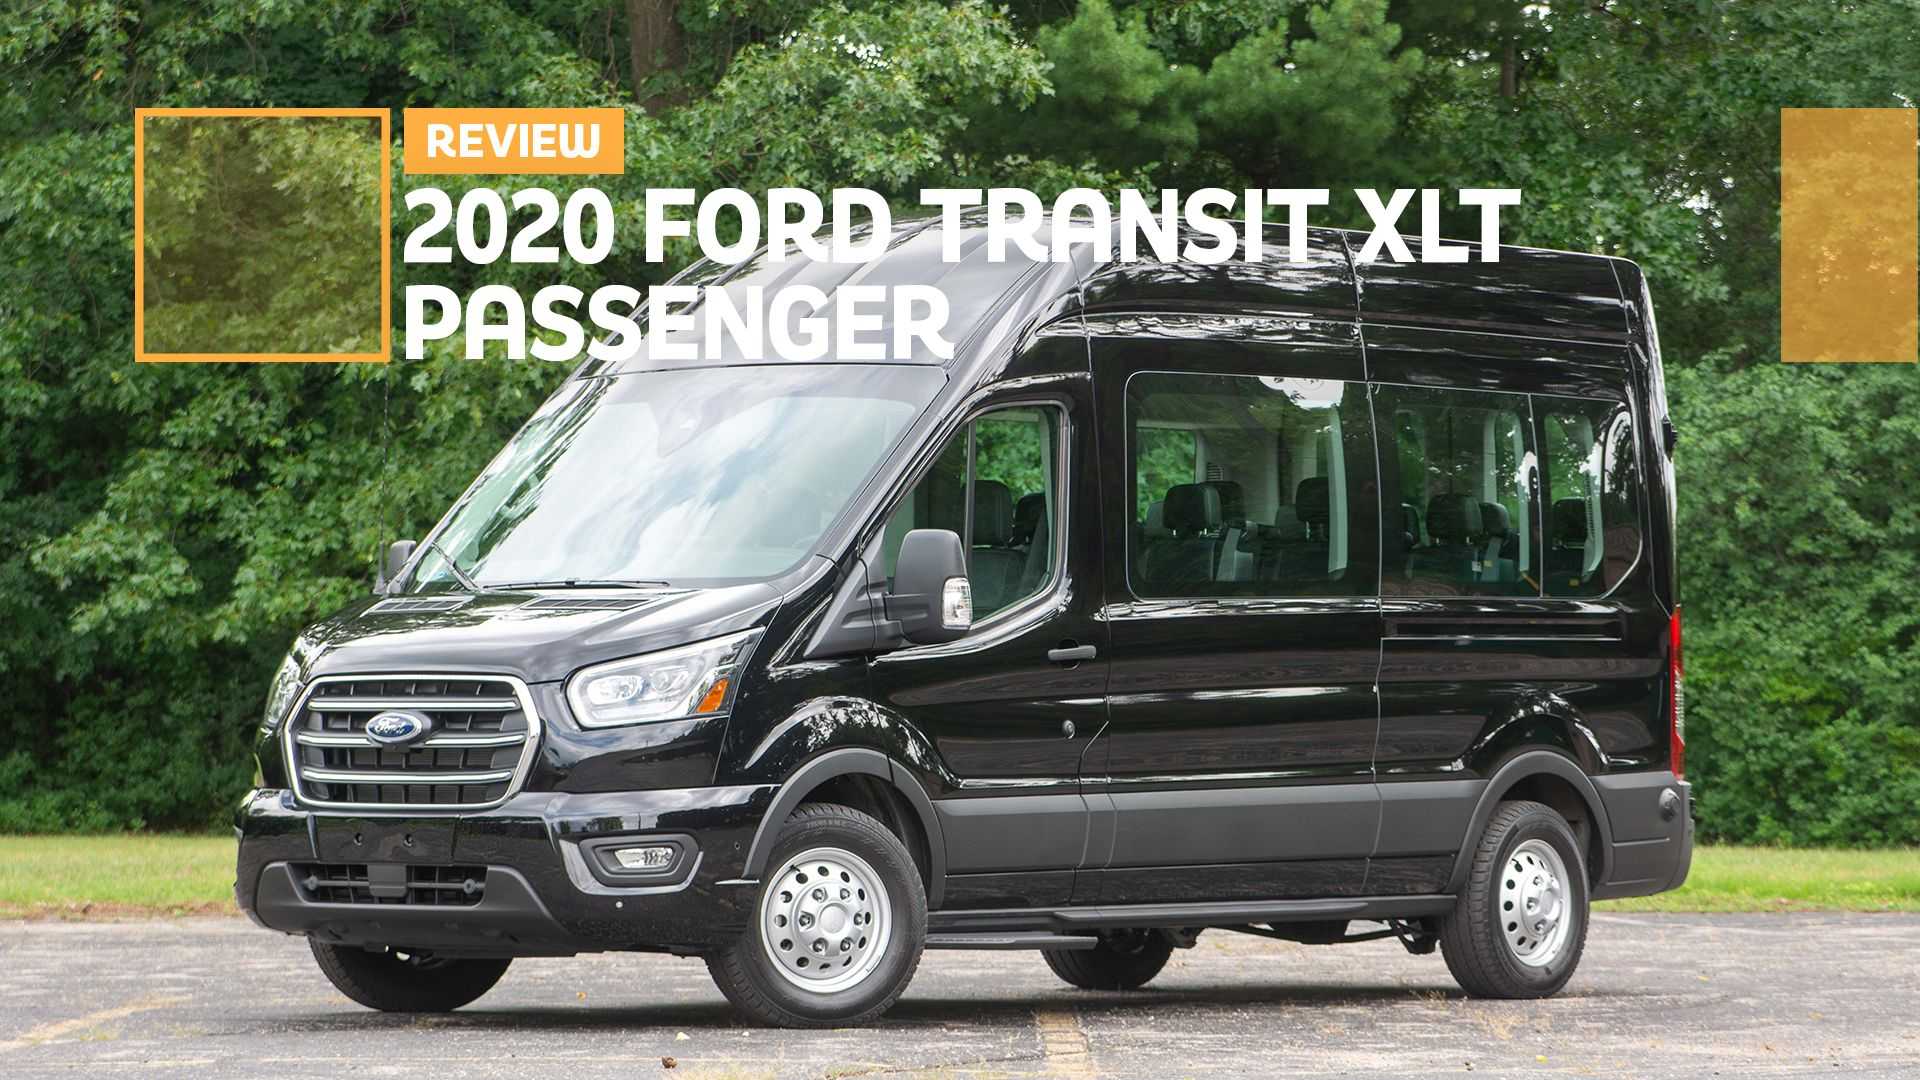 Ford Transit XLT Passenger Review: Personal Personnel Carrier